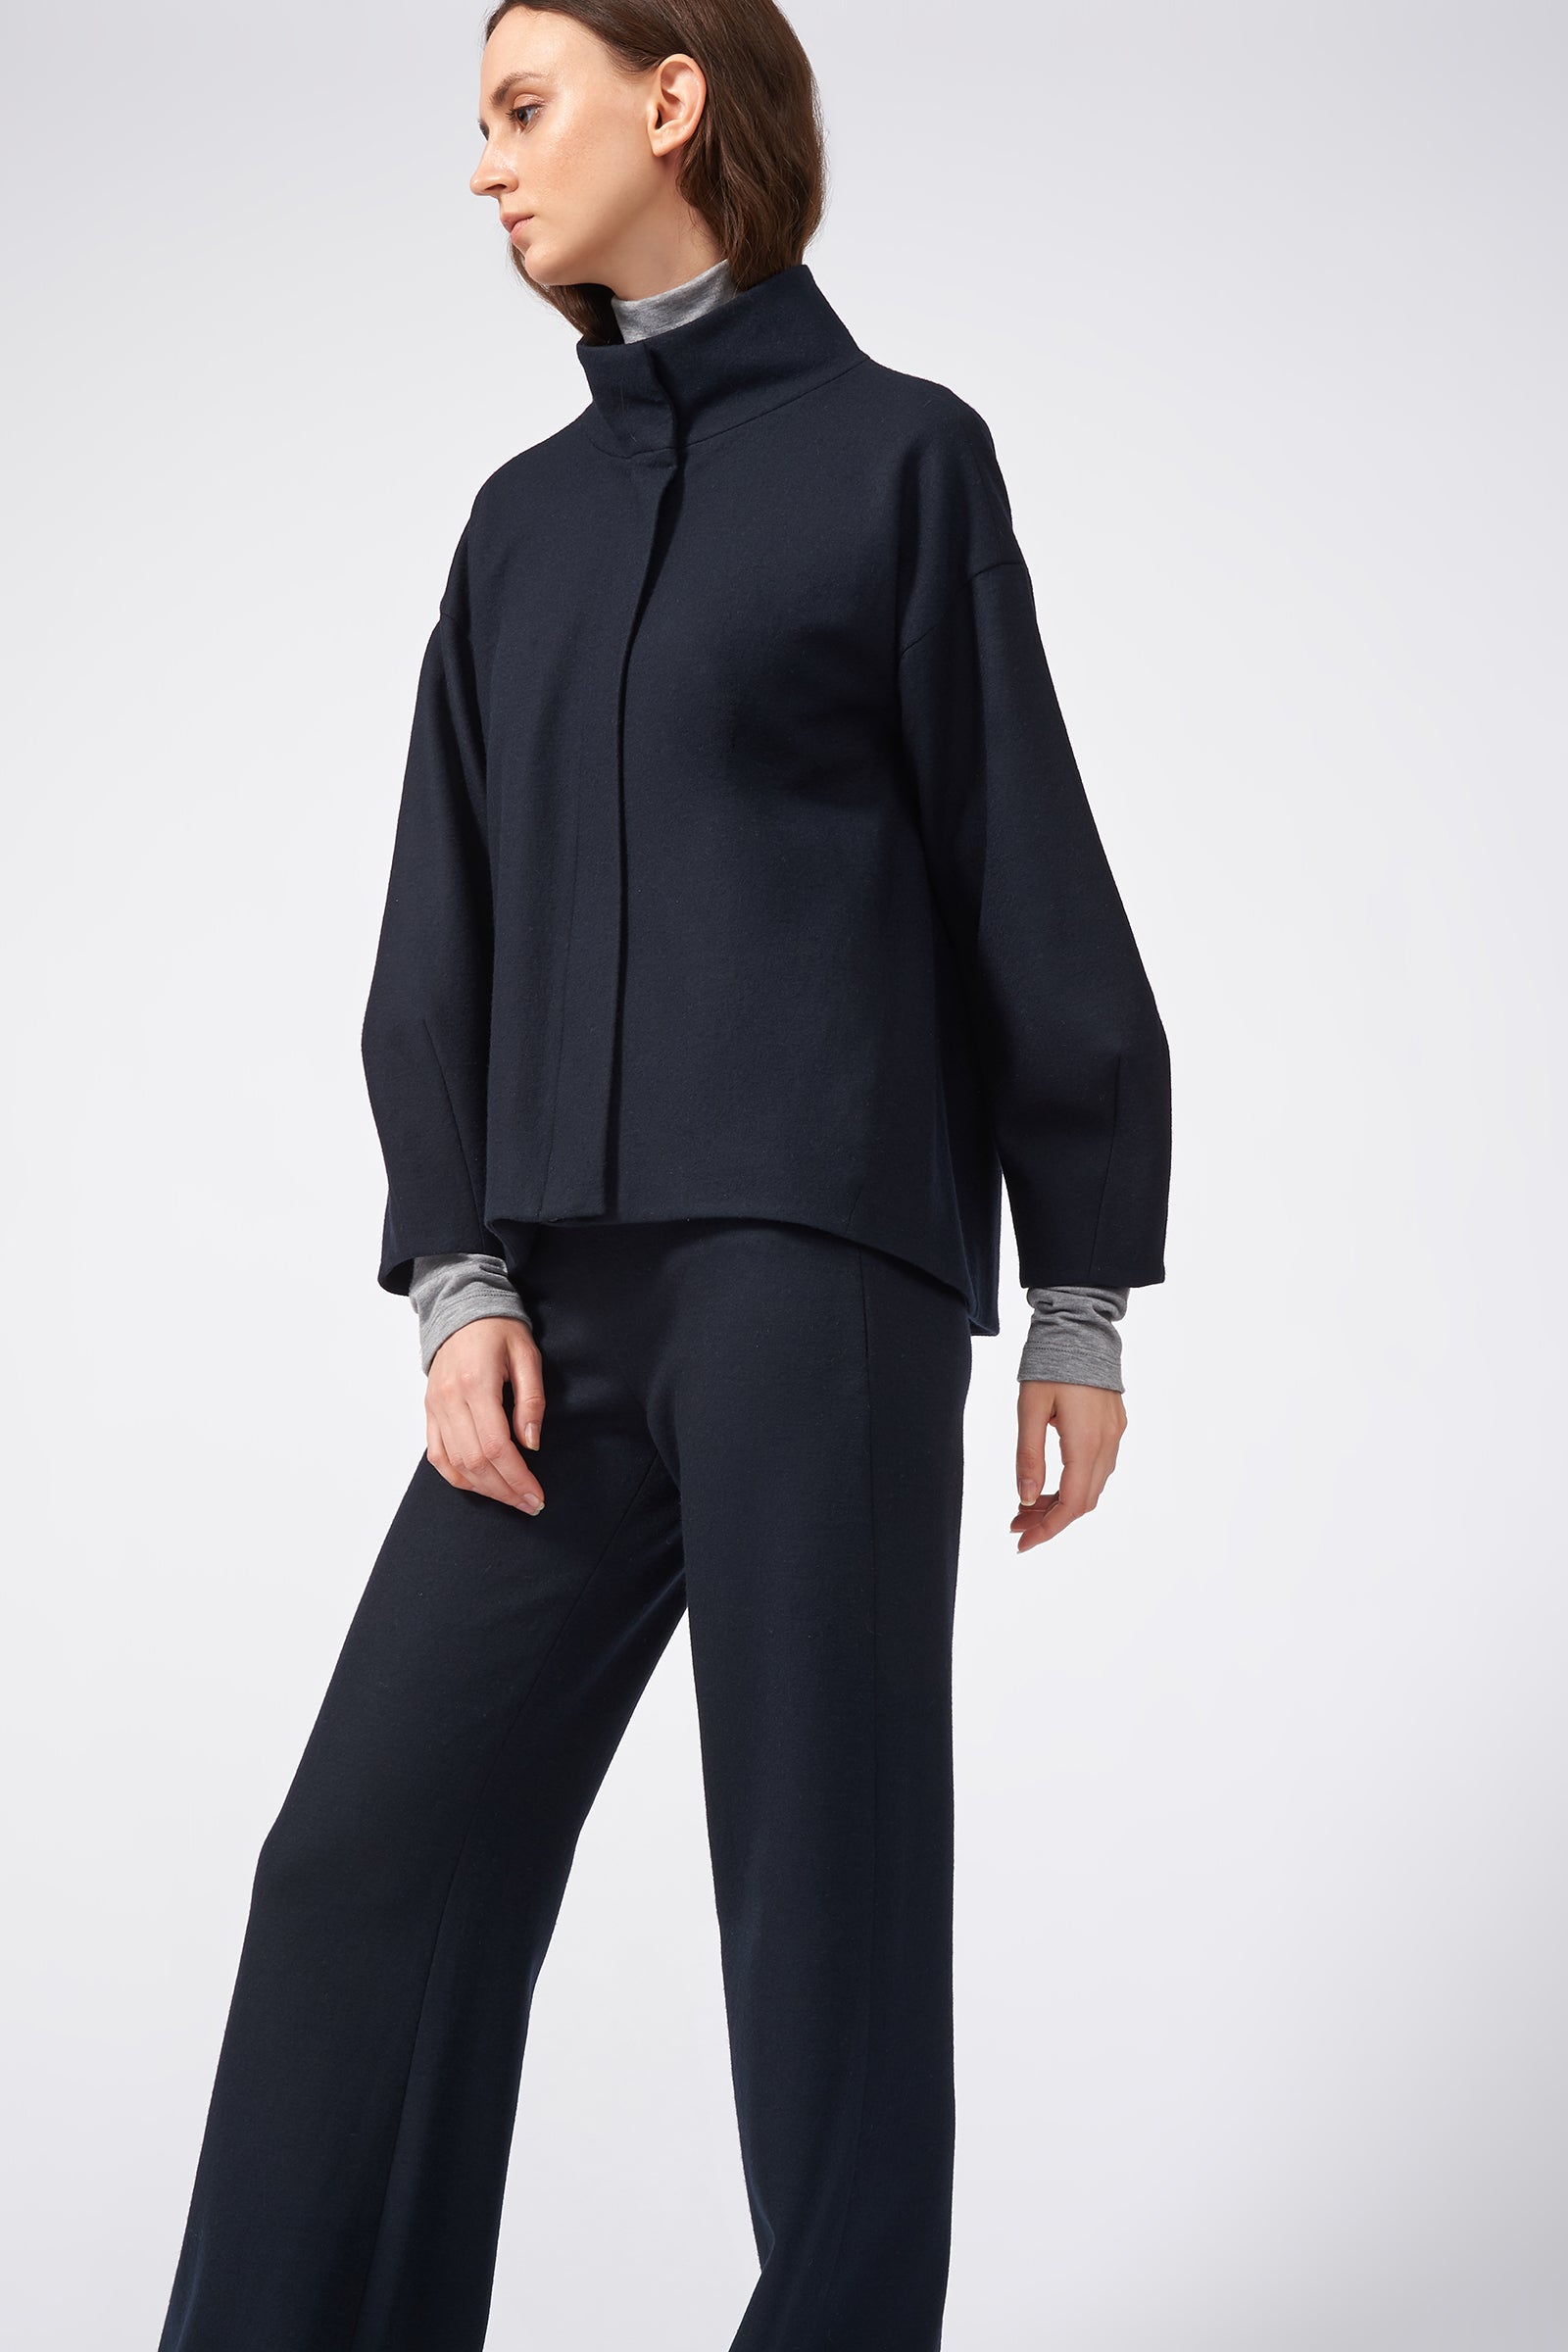 Kal Rieman Angle Cuff Jacket in Midnight on Model Full Front Side View